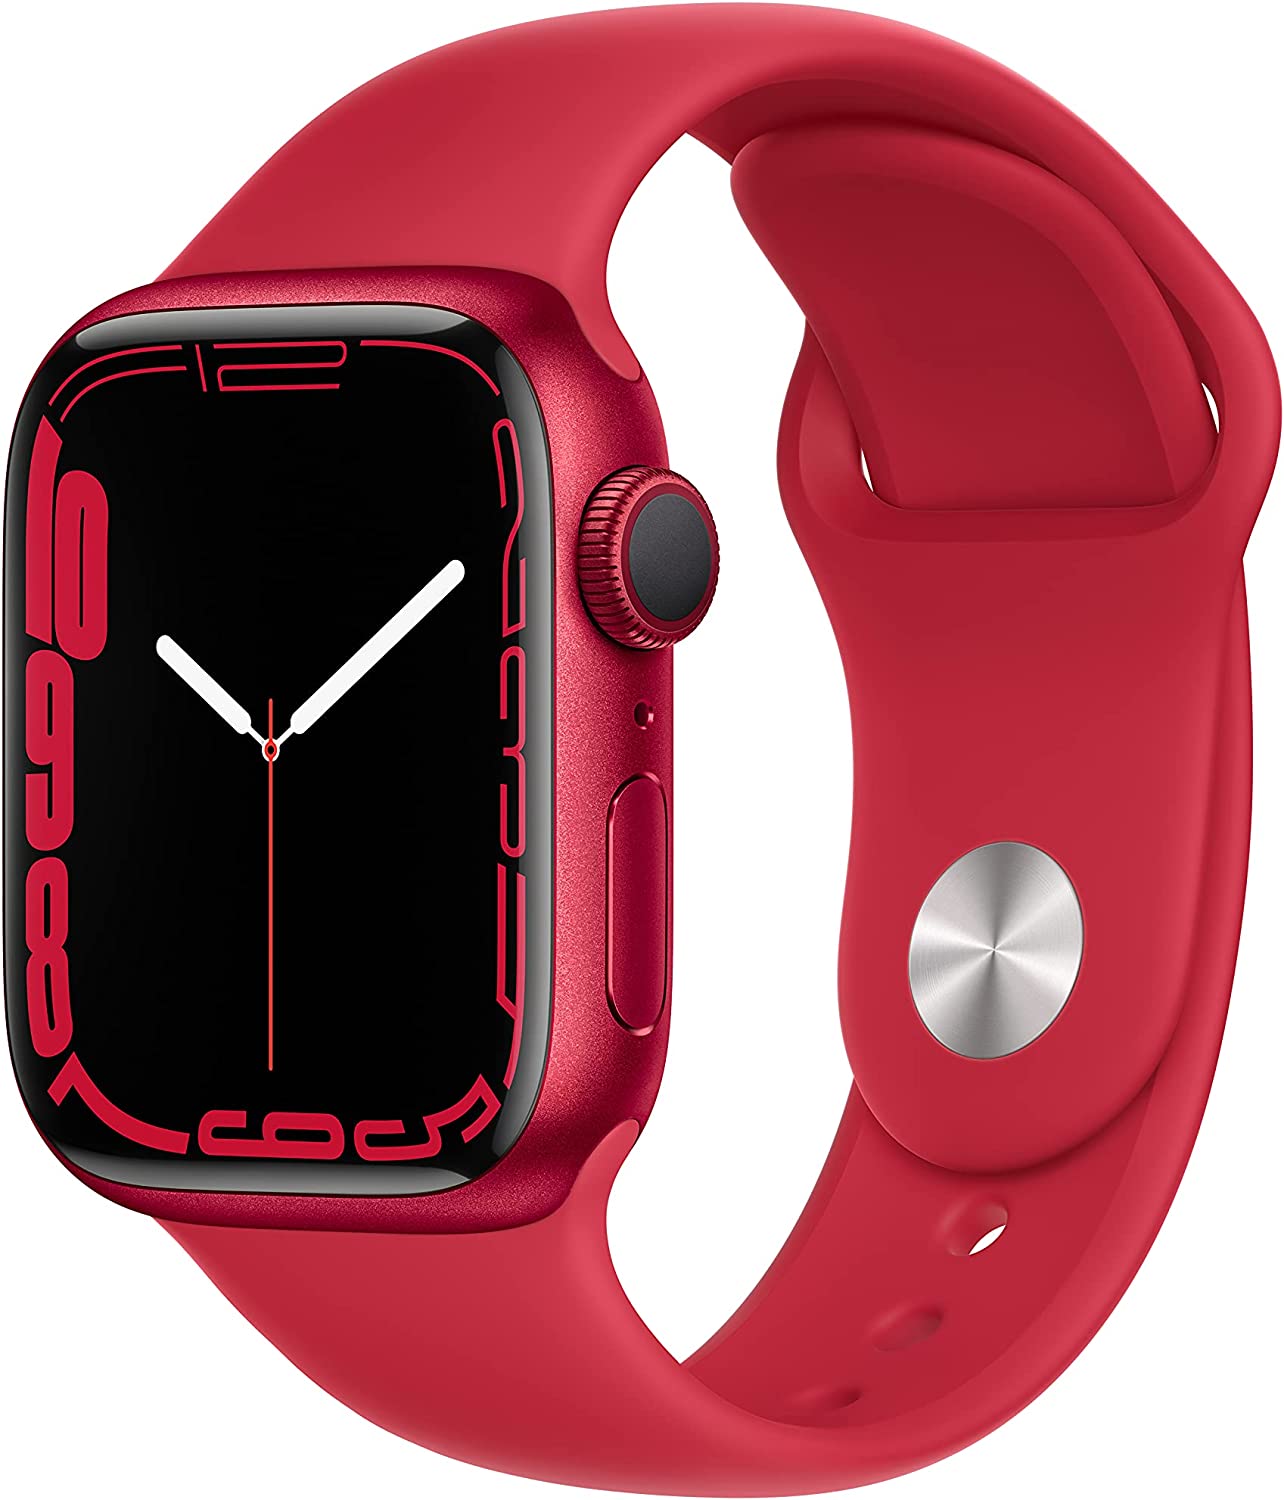 Preorders for the Apple Watch Series 7 begin on October 8, with pricing starting at $400